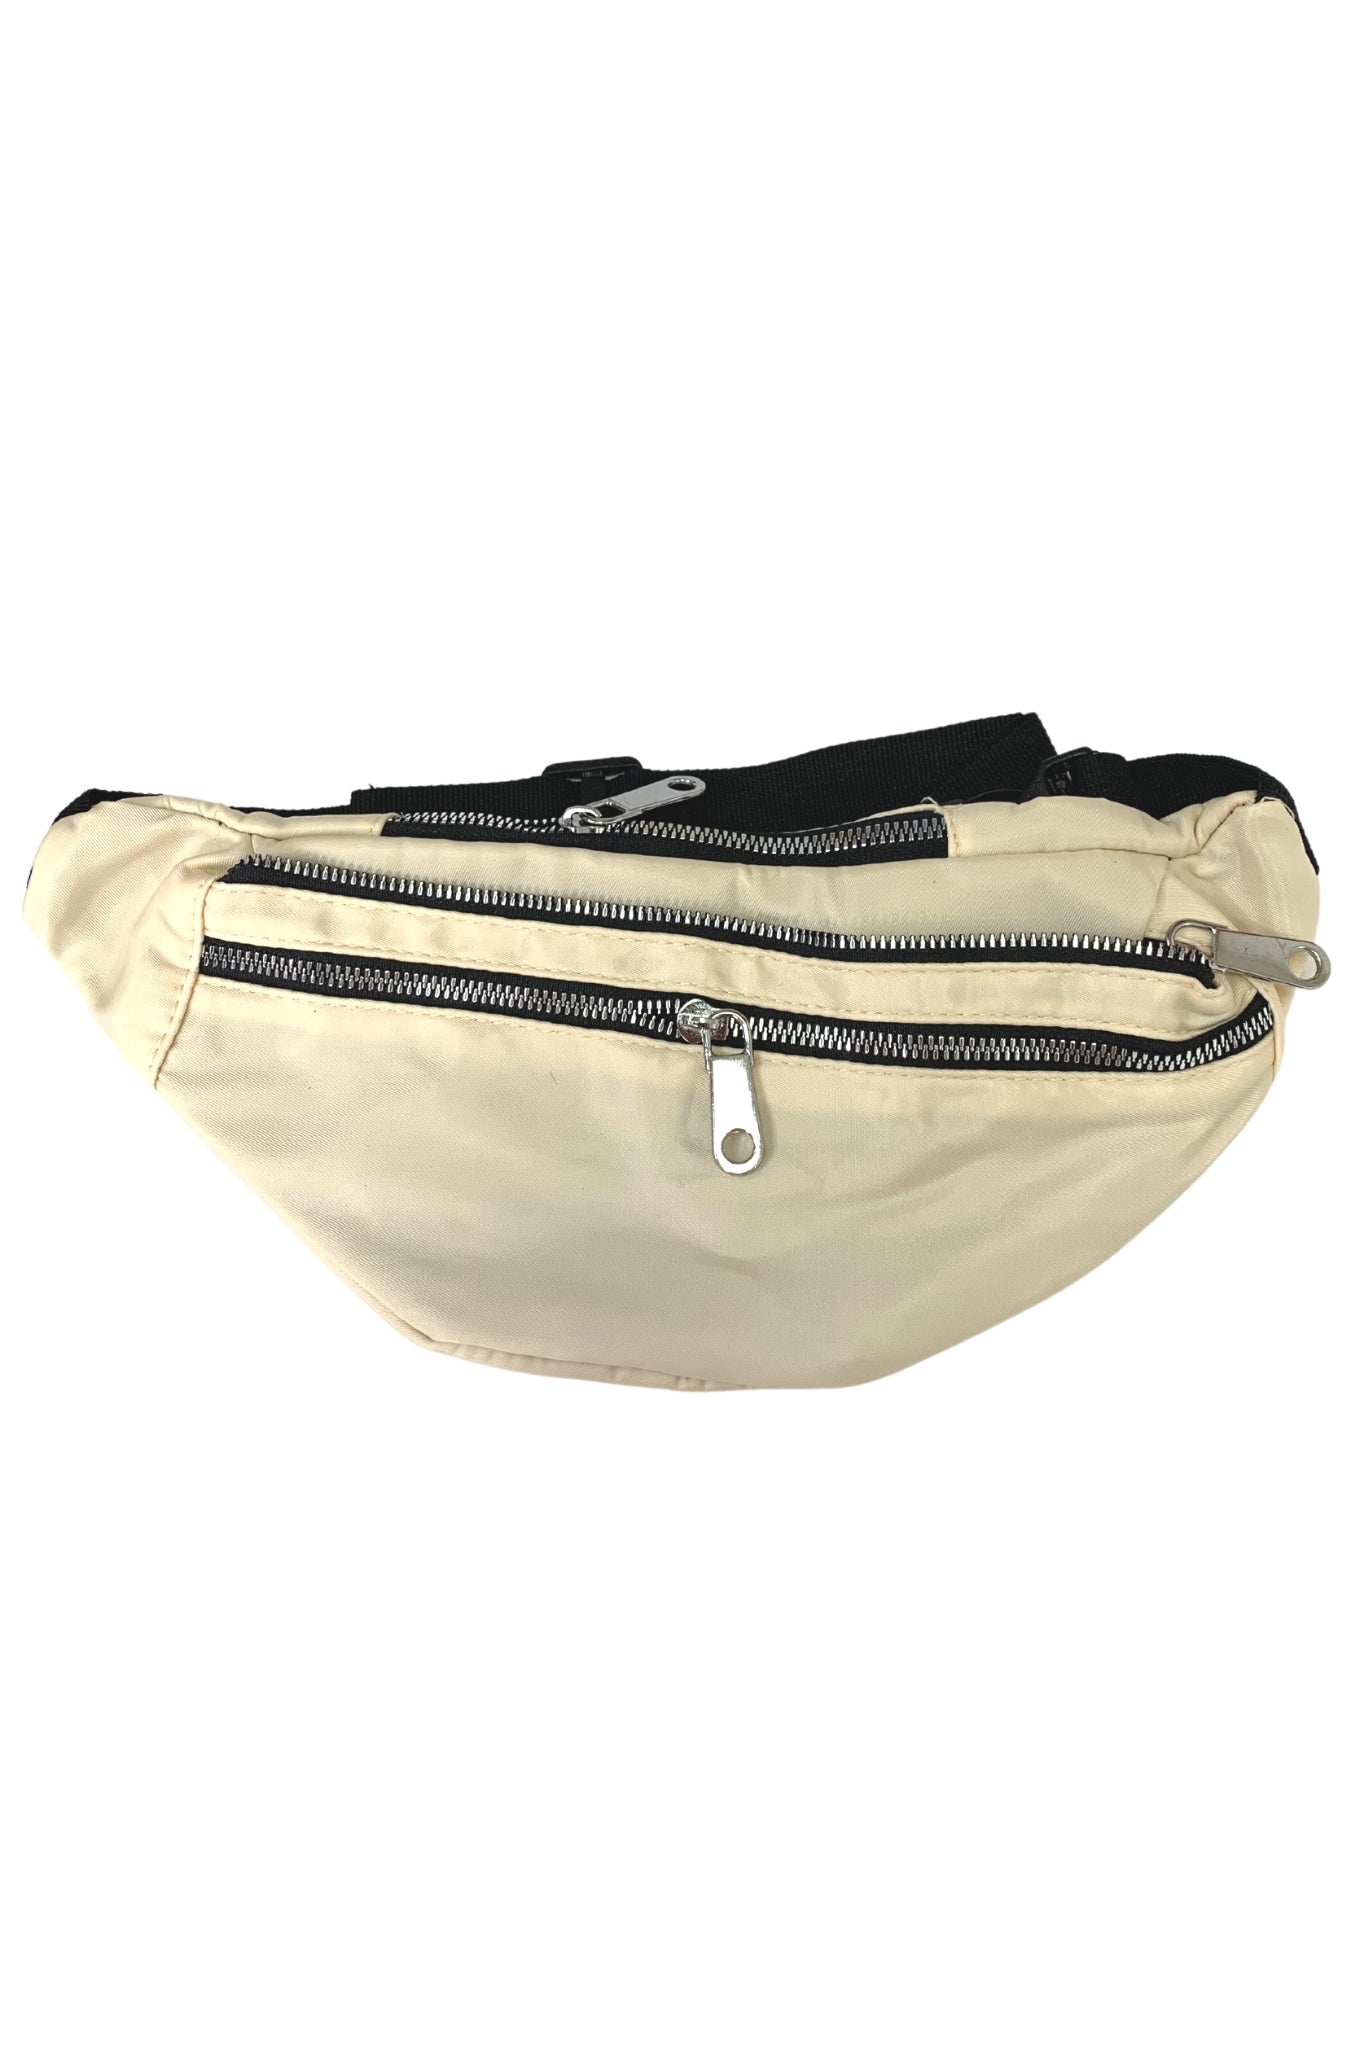 Beige and Black Fanny Pack*FINAL SALE*